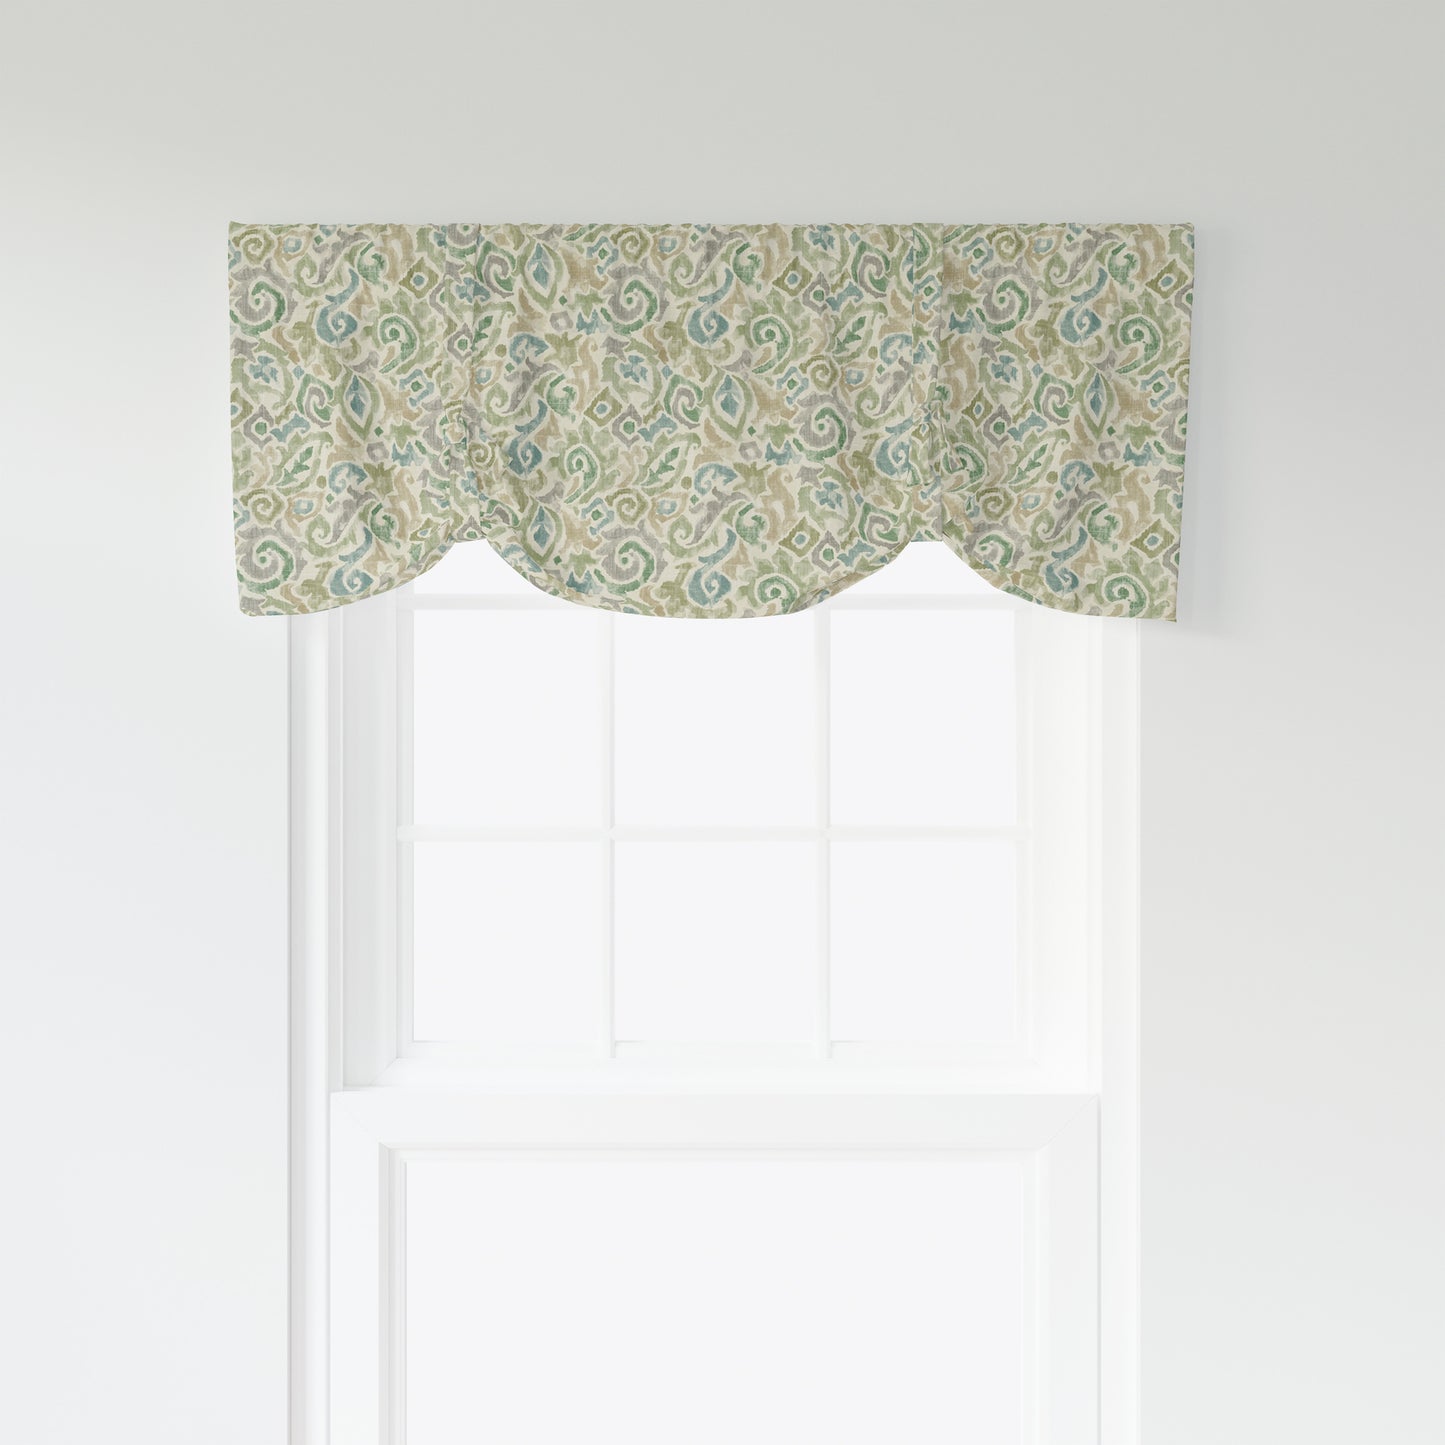 Tie-up Valance in Jester Bay Green Paisley Watercolor